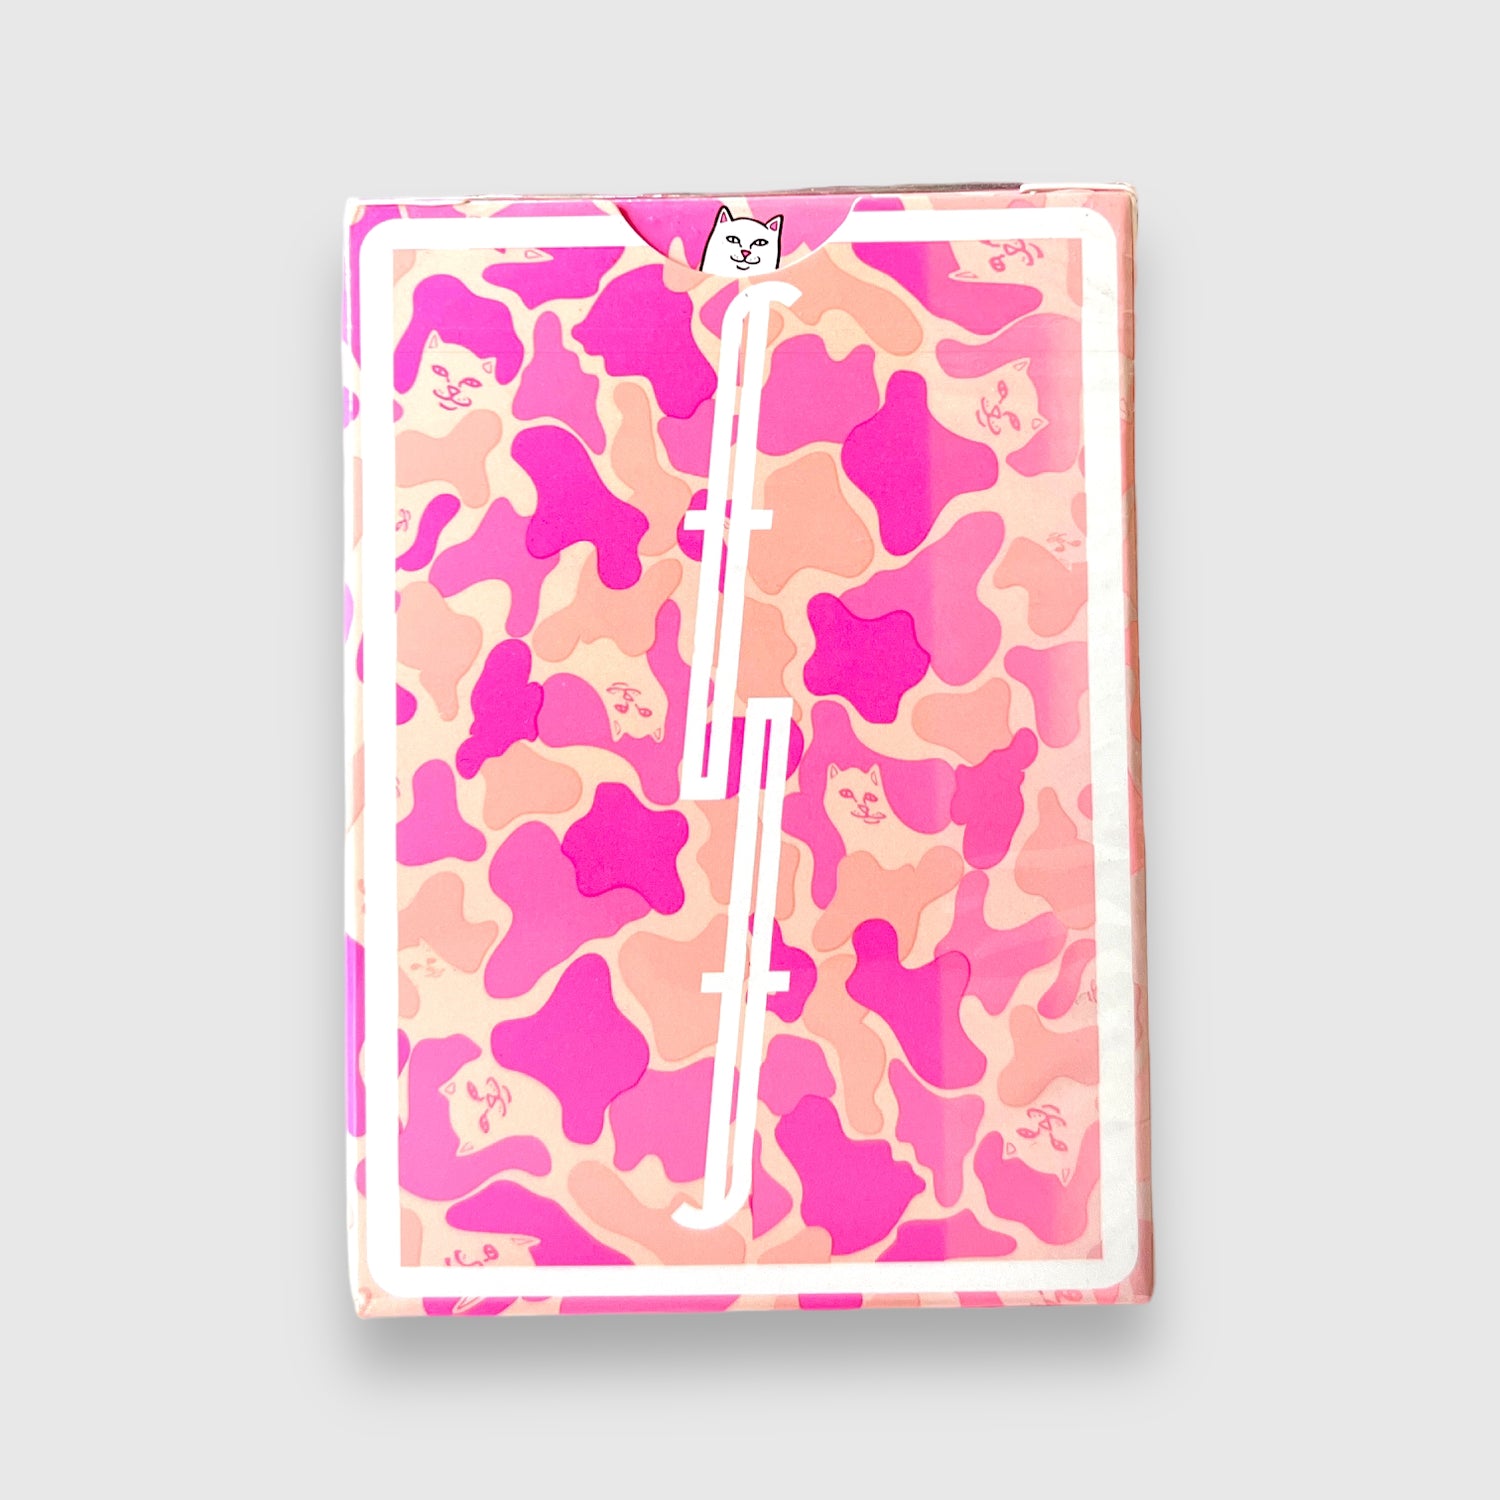 Ripndip Ice Cream  V2 Neon Pink Fontaine Playing Cards